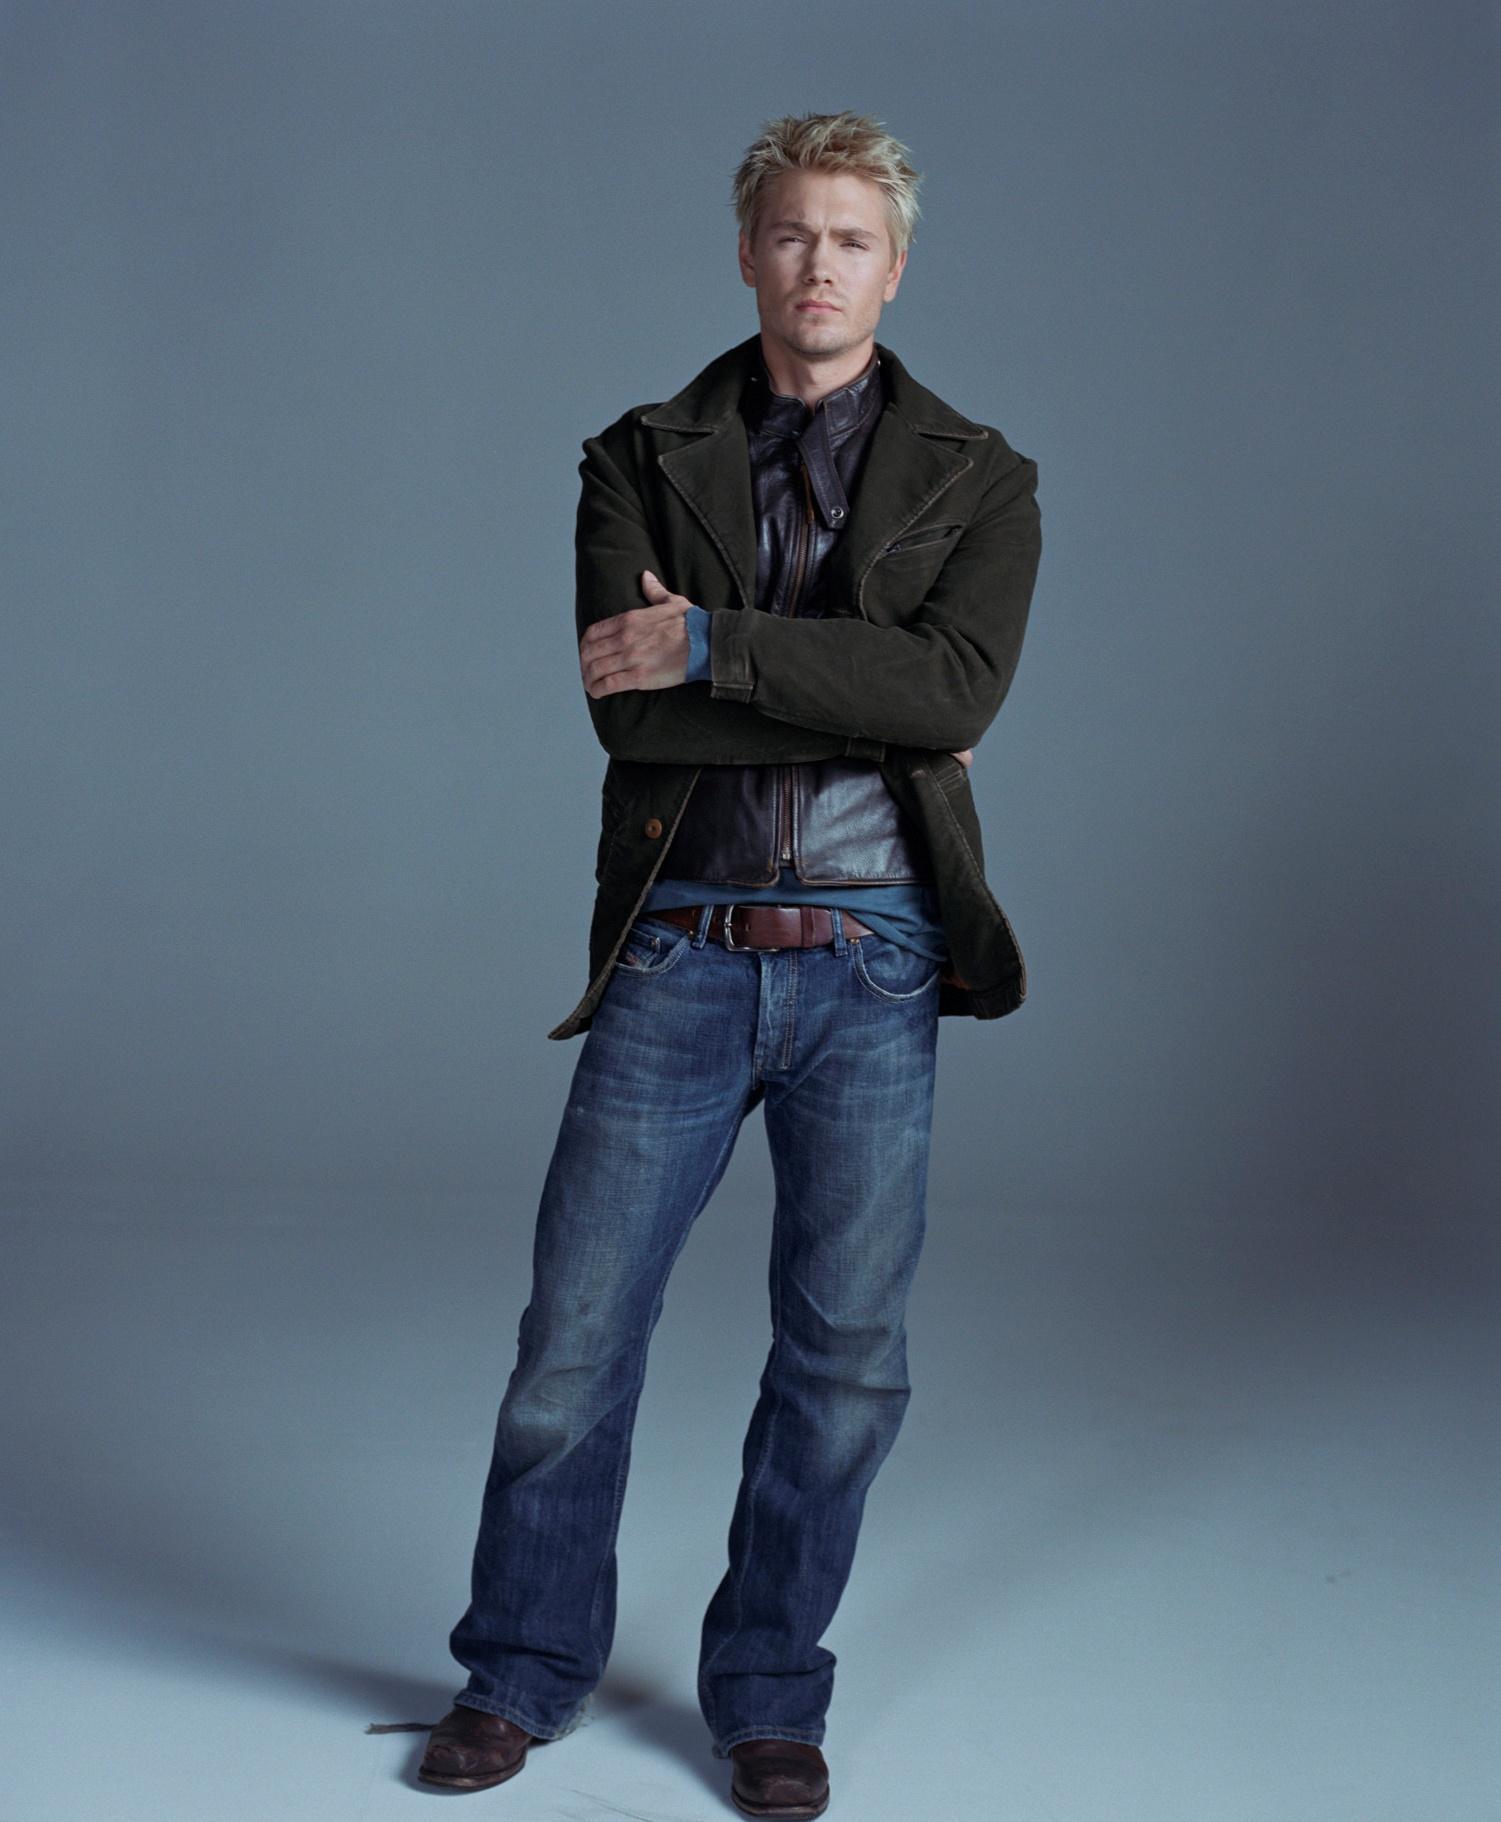 Chad Michael Murray Wallpaper For IPhone Celebrities Wallpaper